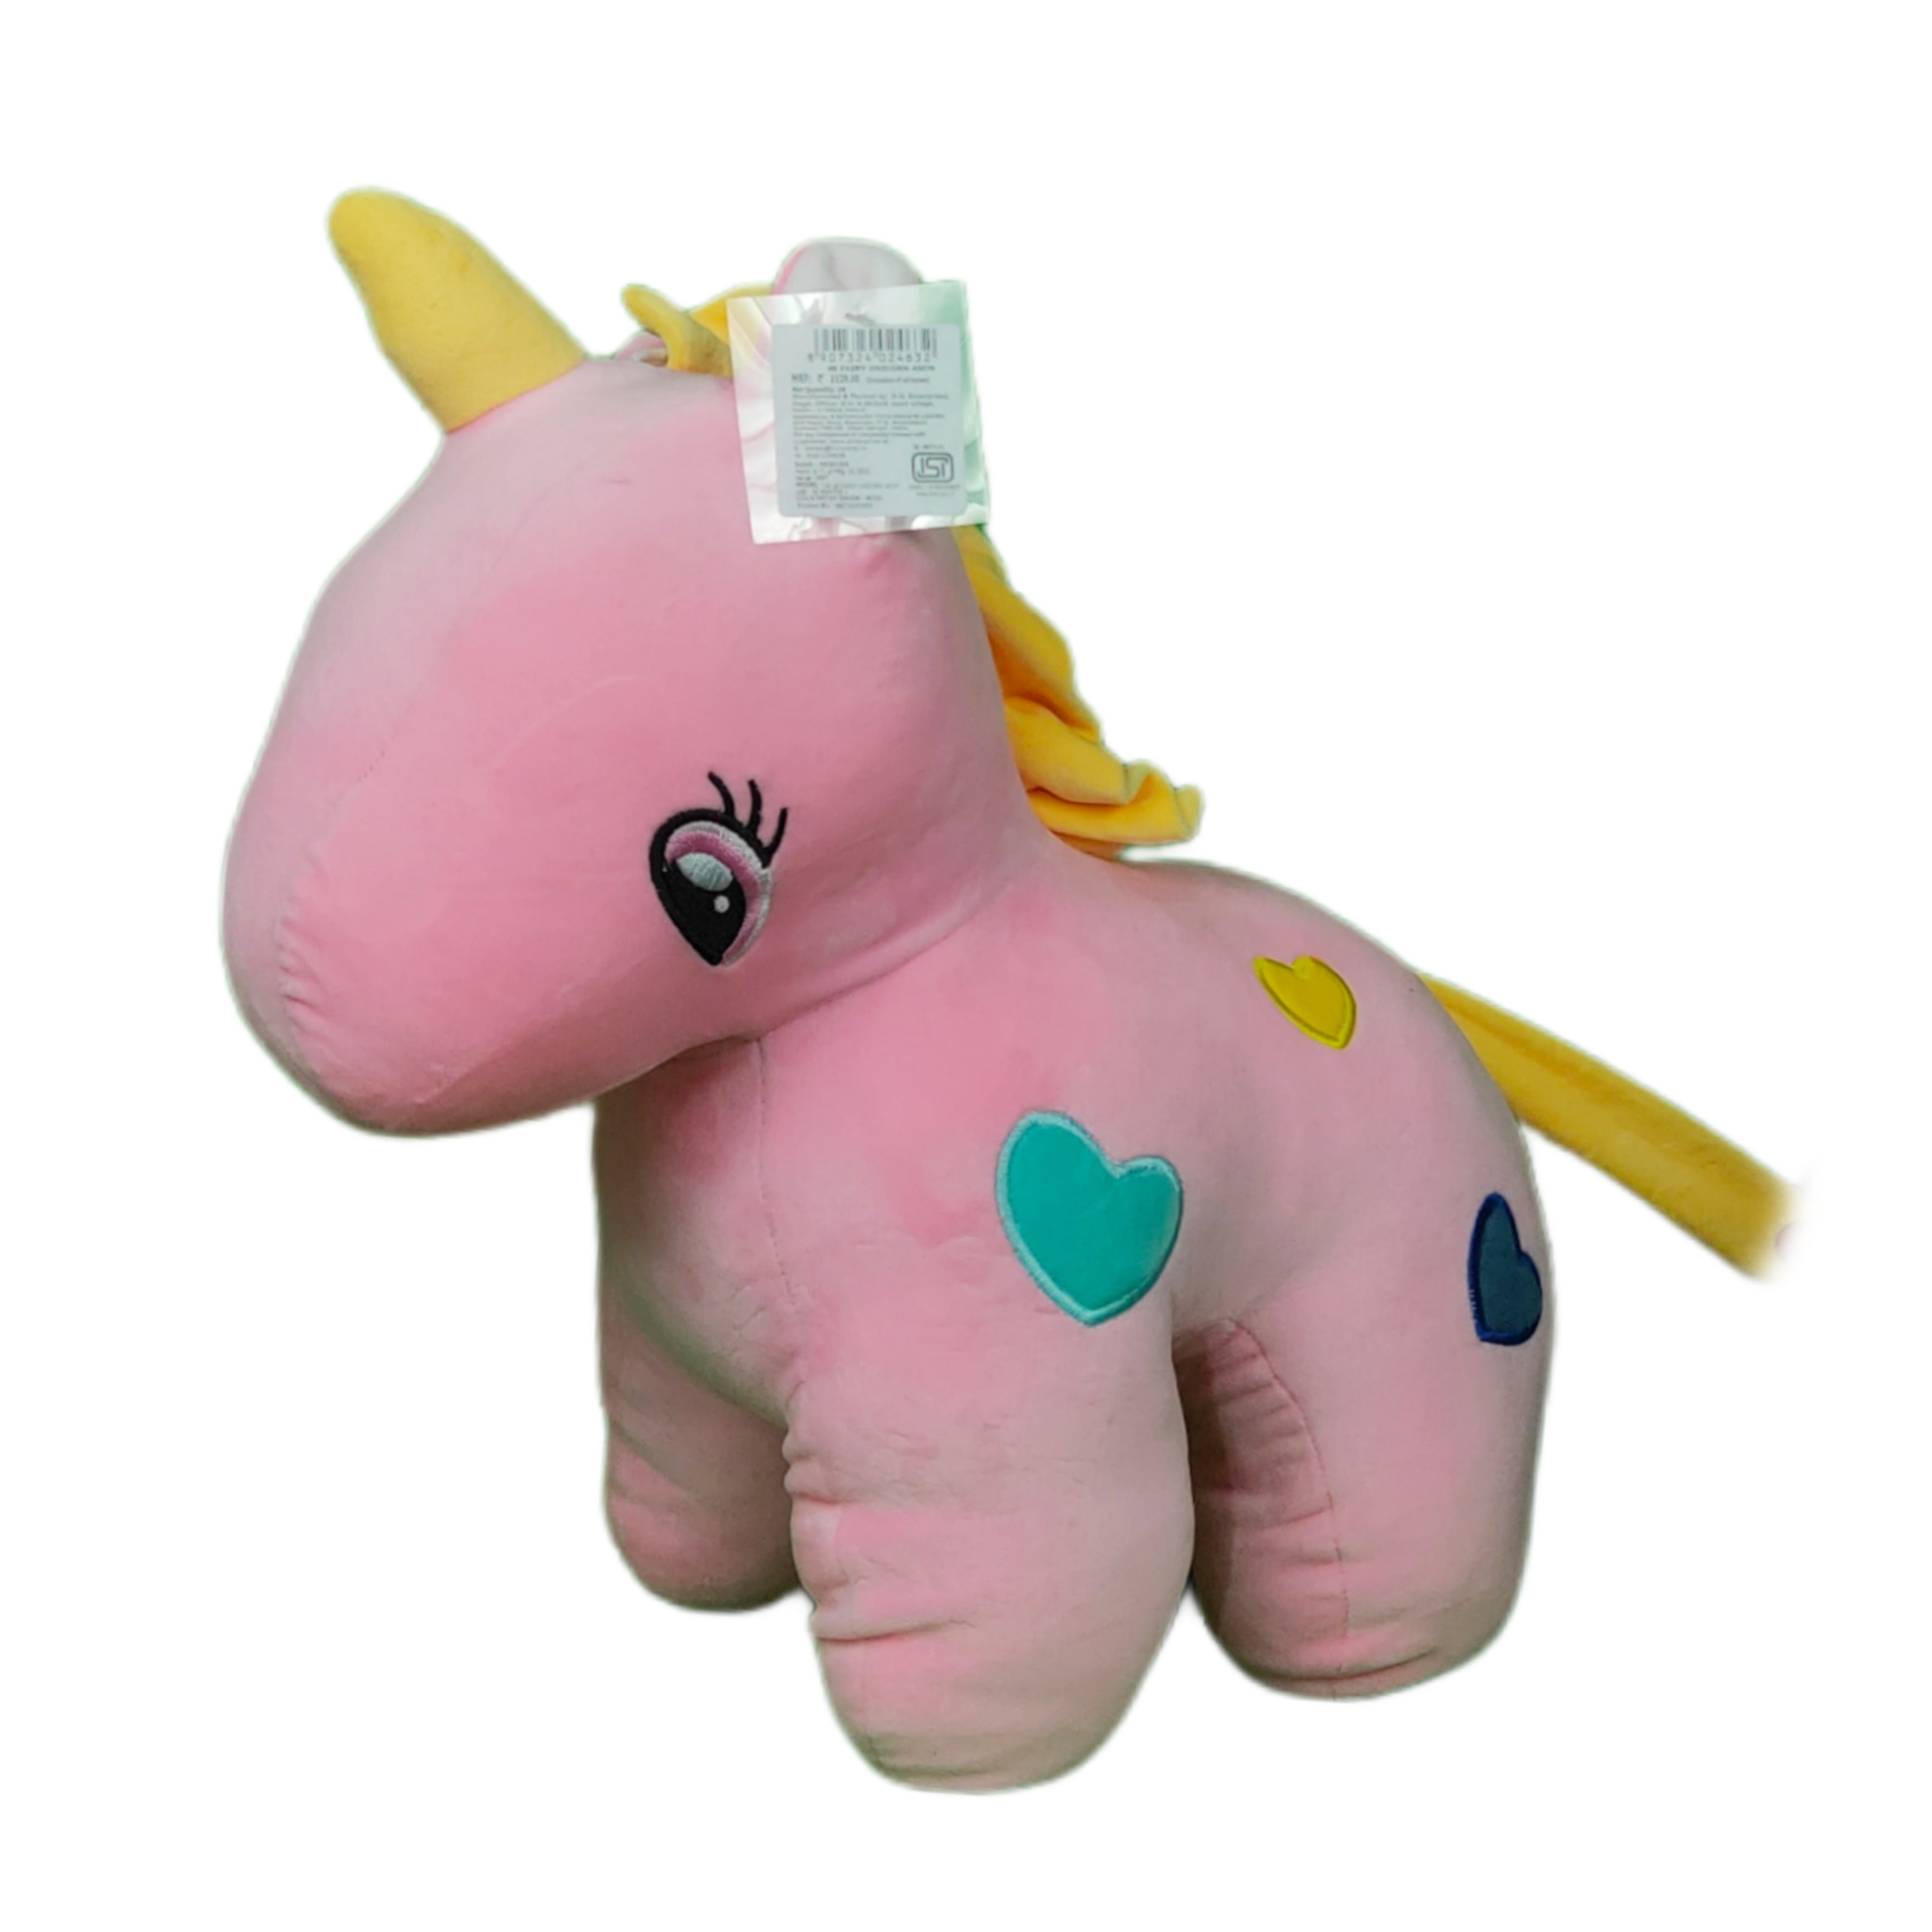 Play Hour Fairy Unicorn Plush Soft Toy For Ages 3 Years And Up - Baby Pink, 45cm